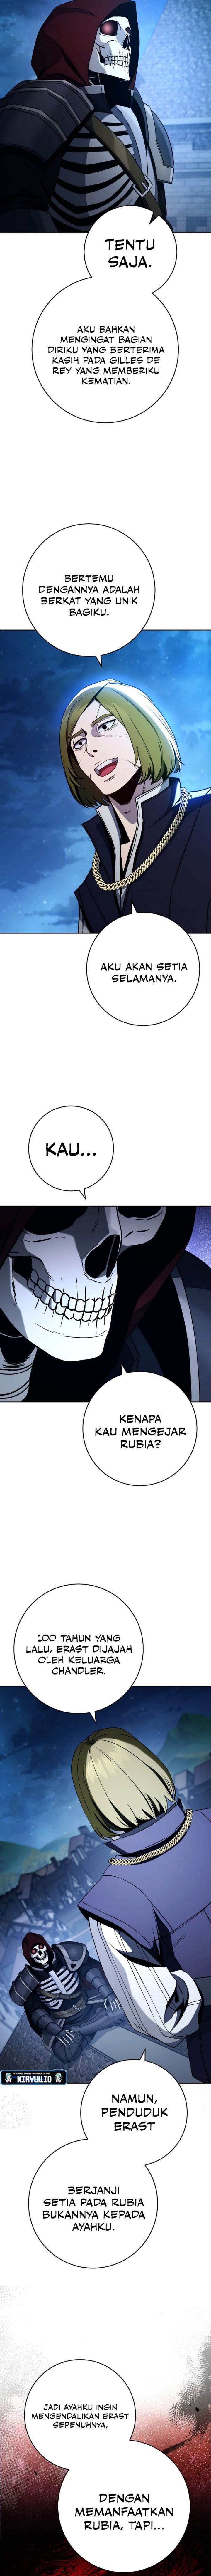 Skeleton Soldier Couldn’t Protect the Dungeon Chapter 251